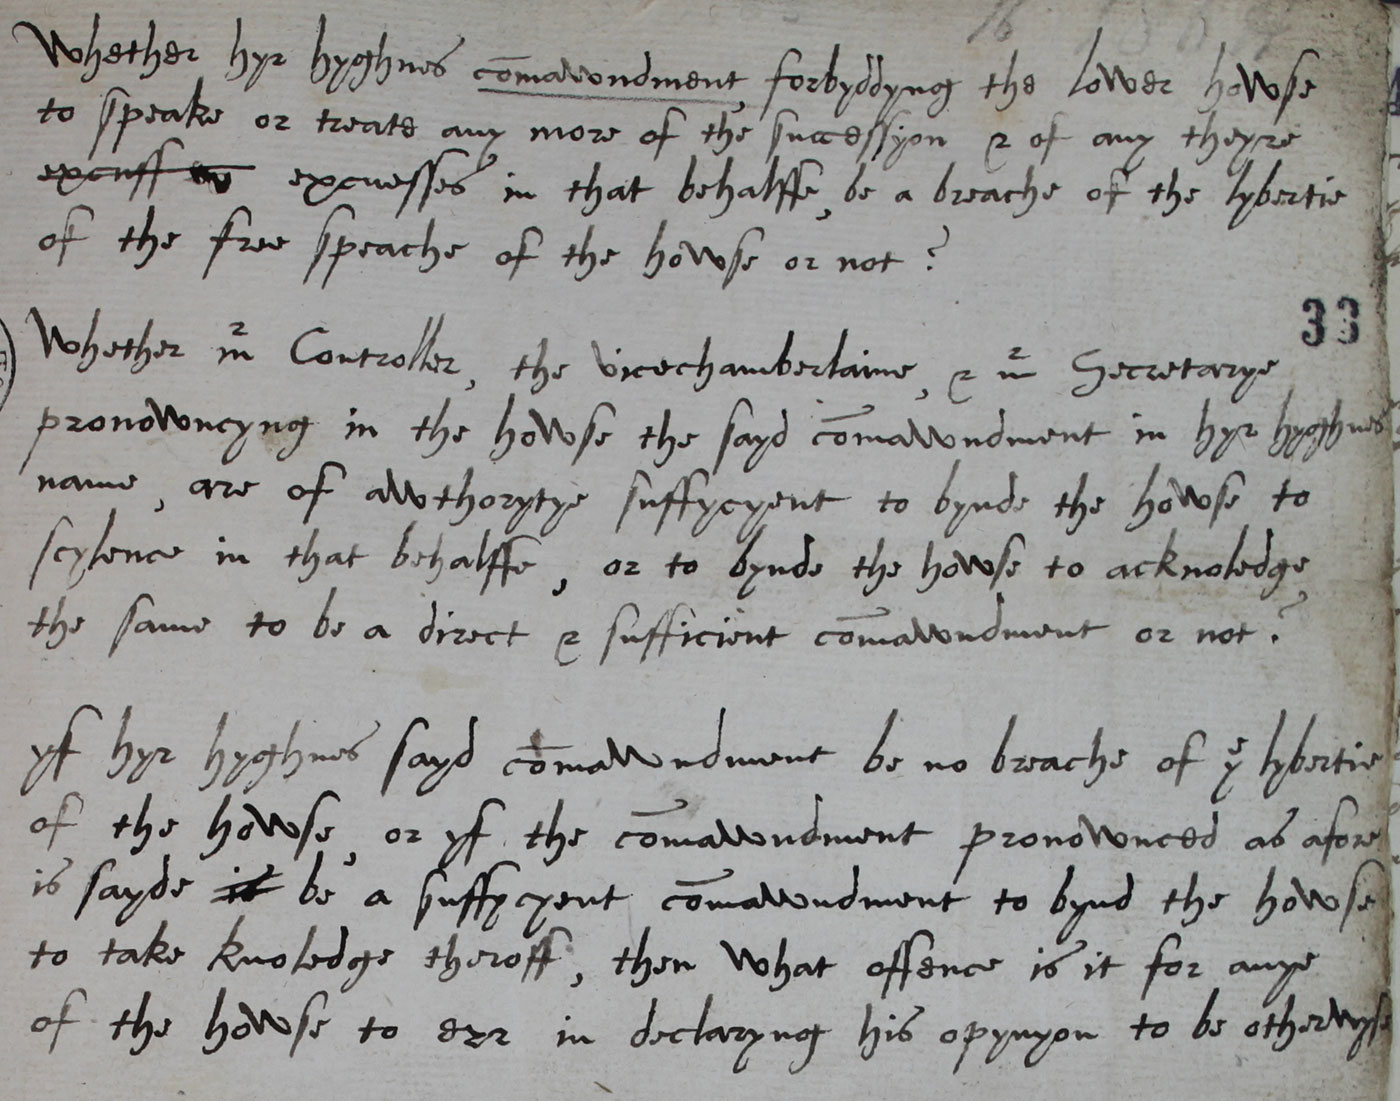 Peter Wentworth’s questions on parliamentary privilege, 11 November 1566 (SP 12/41 f.33)